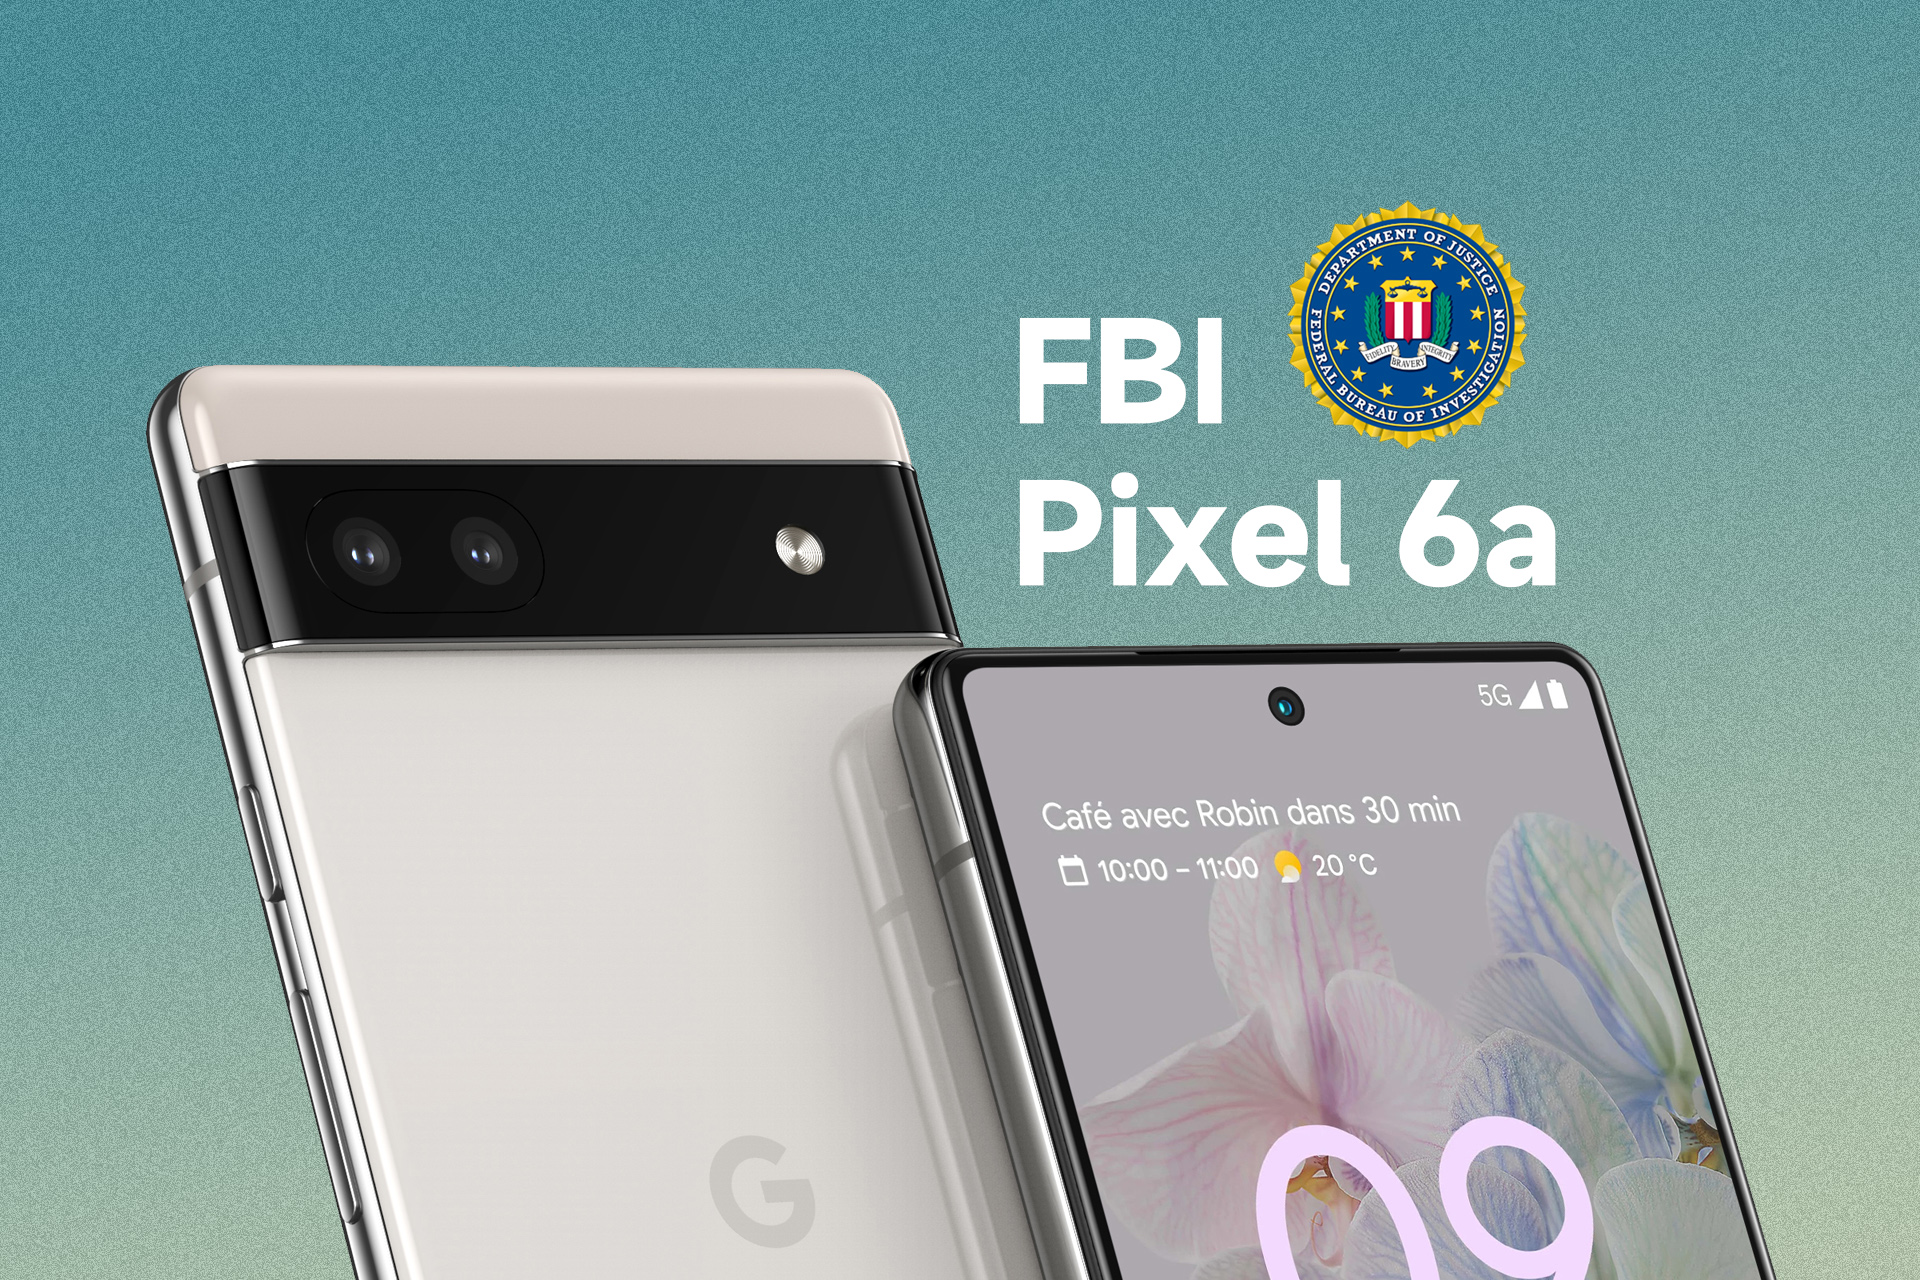 Google Pixel 6a with FBI Android ROM is in our hands